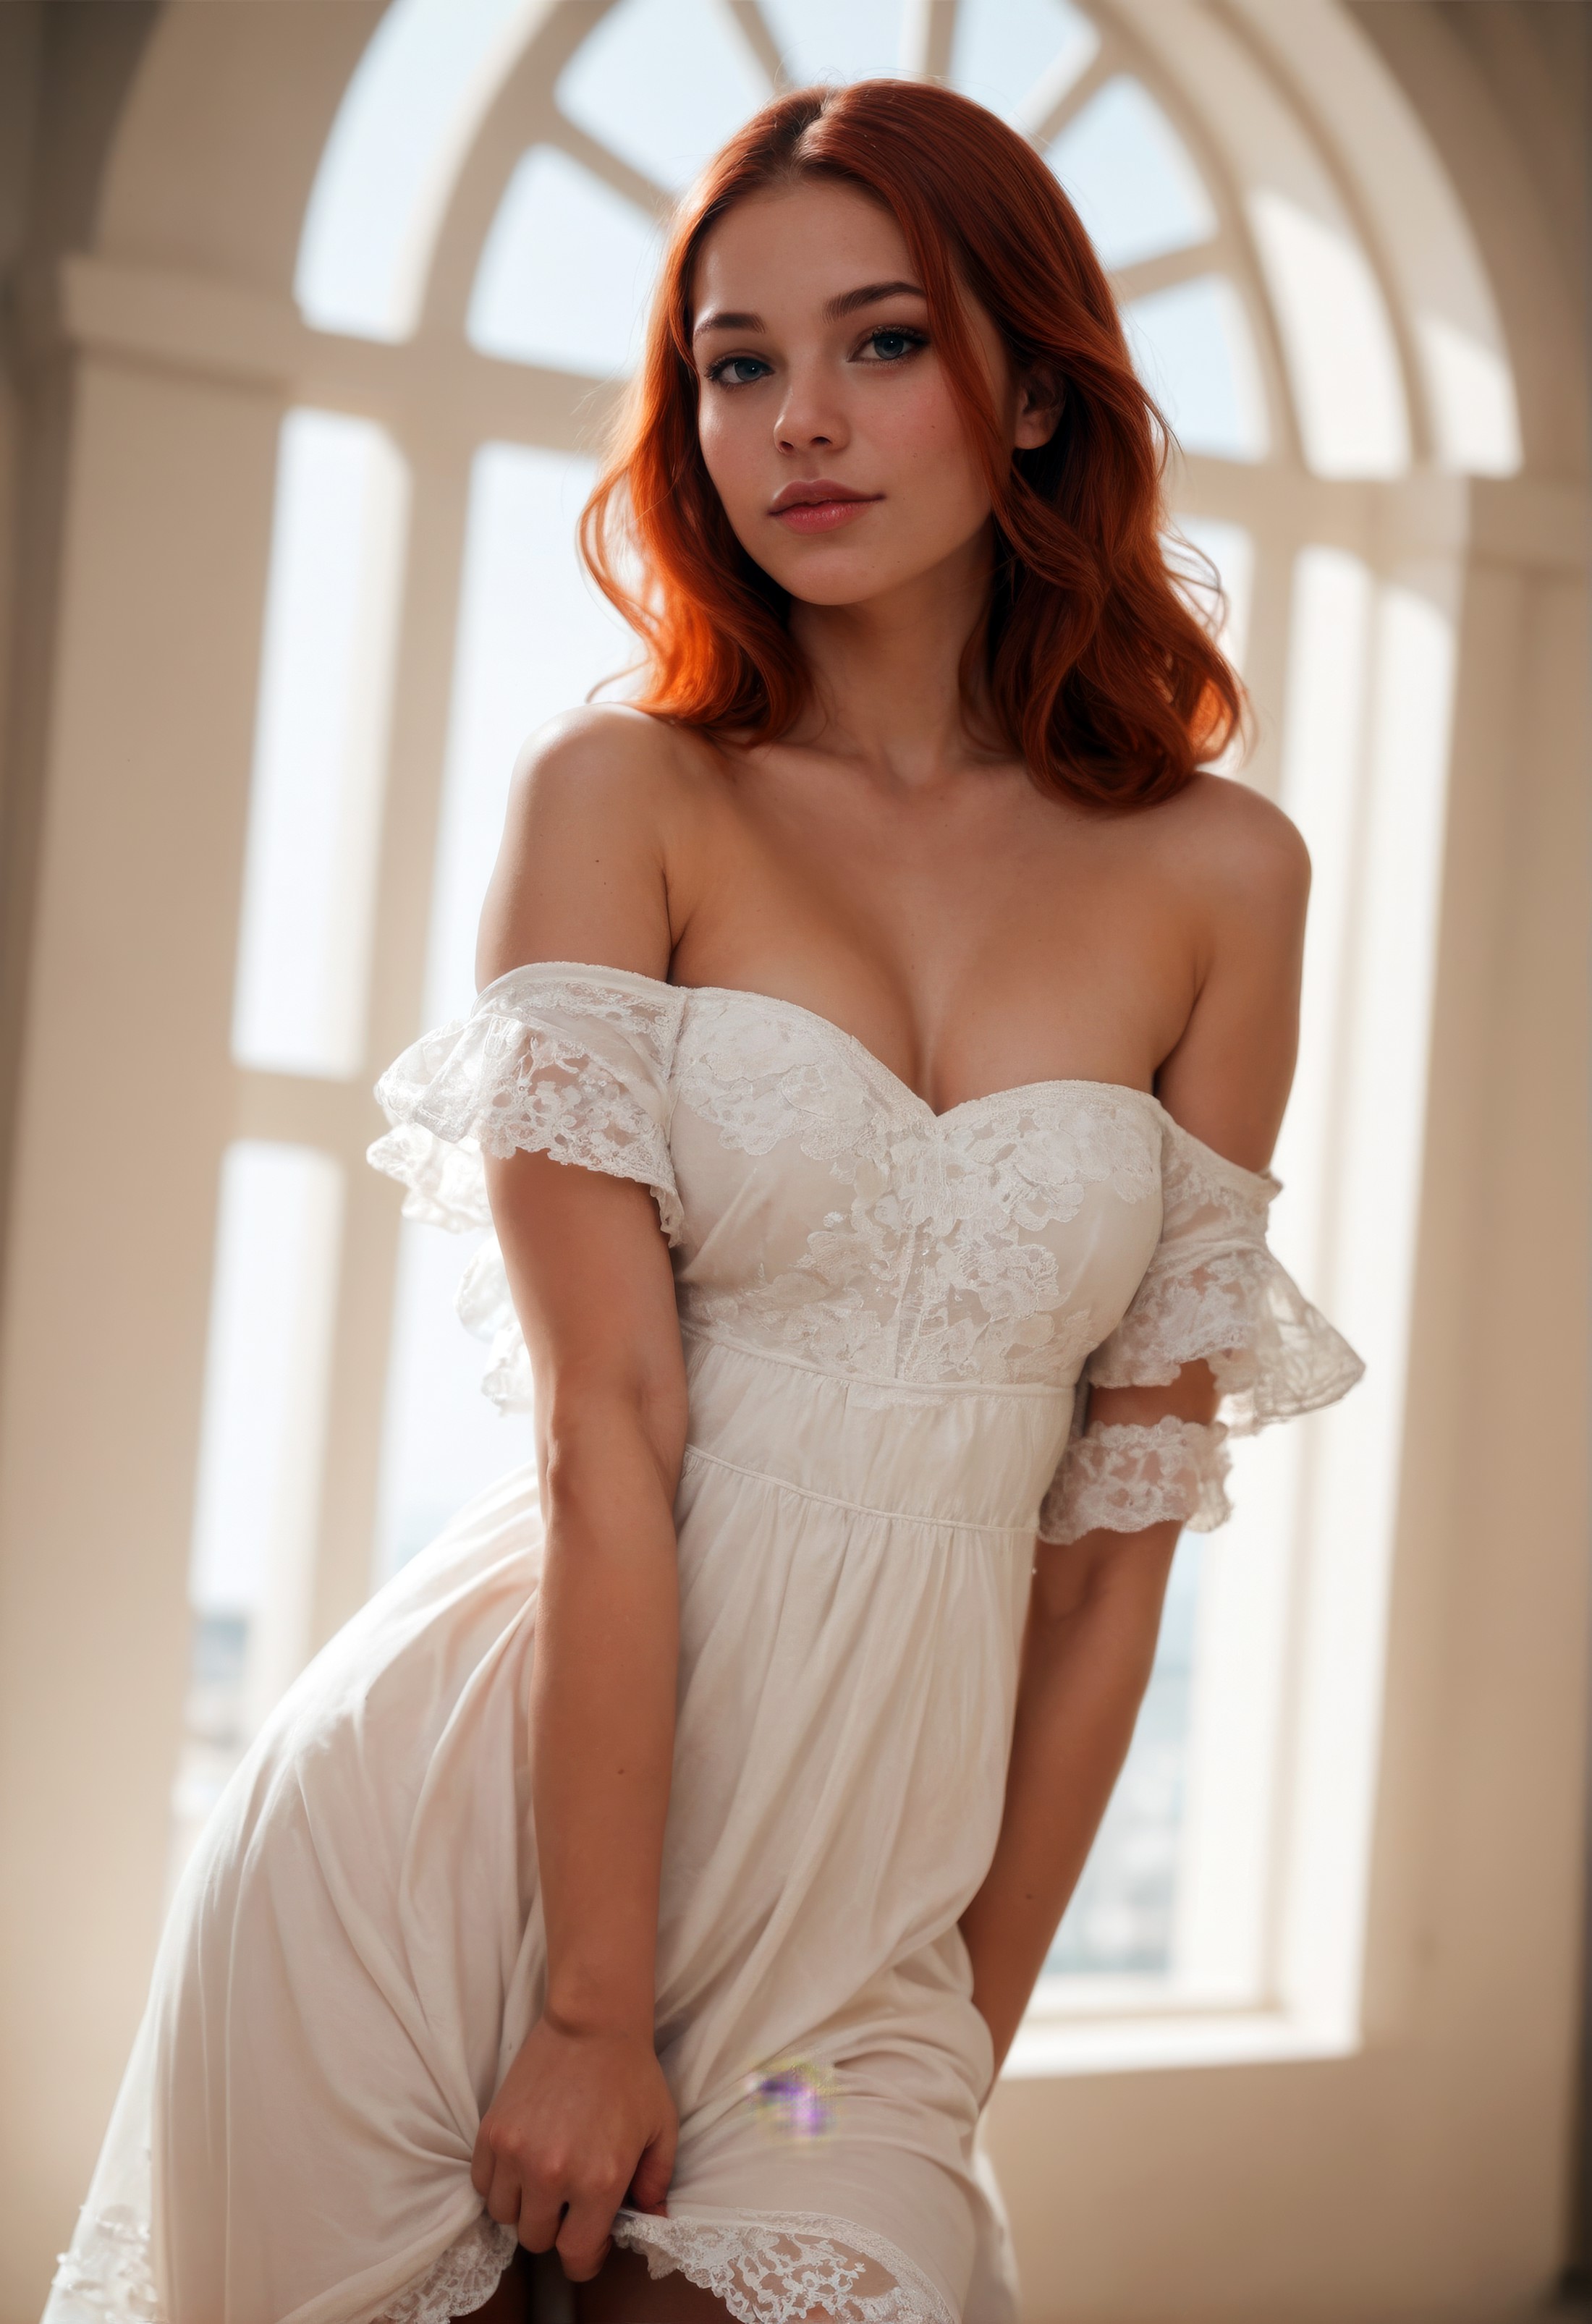 score_9,score_8_up,score_7_up,realistic photography,beautiful redhead girl,off shoulder paillette dress,cinematic lighting...